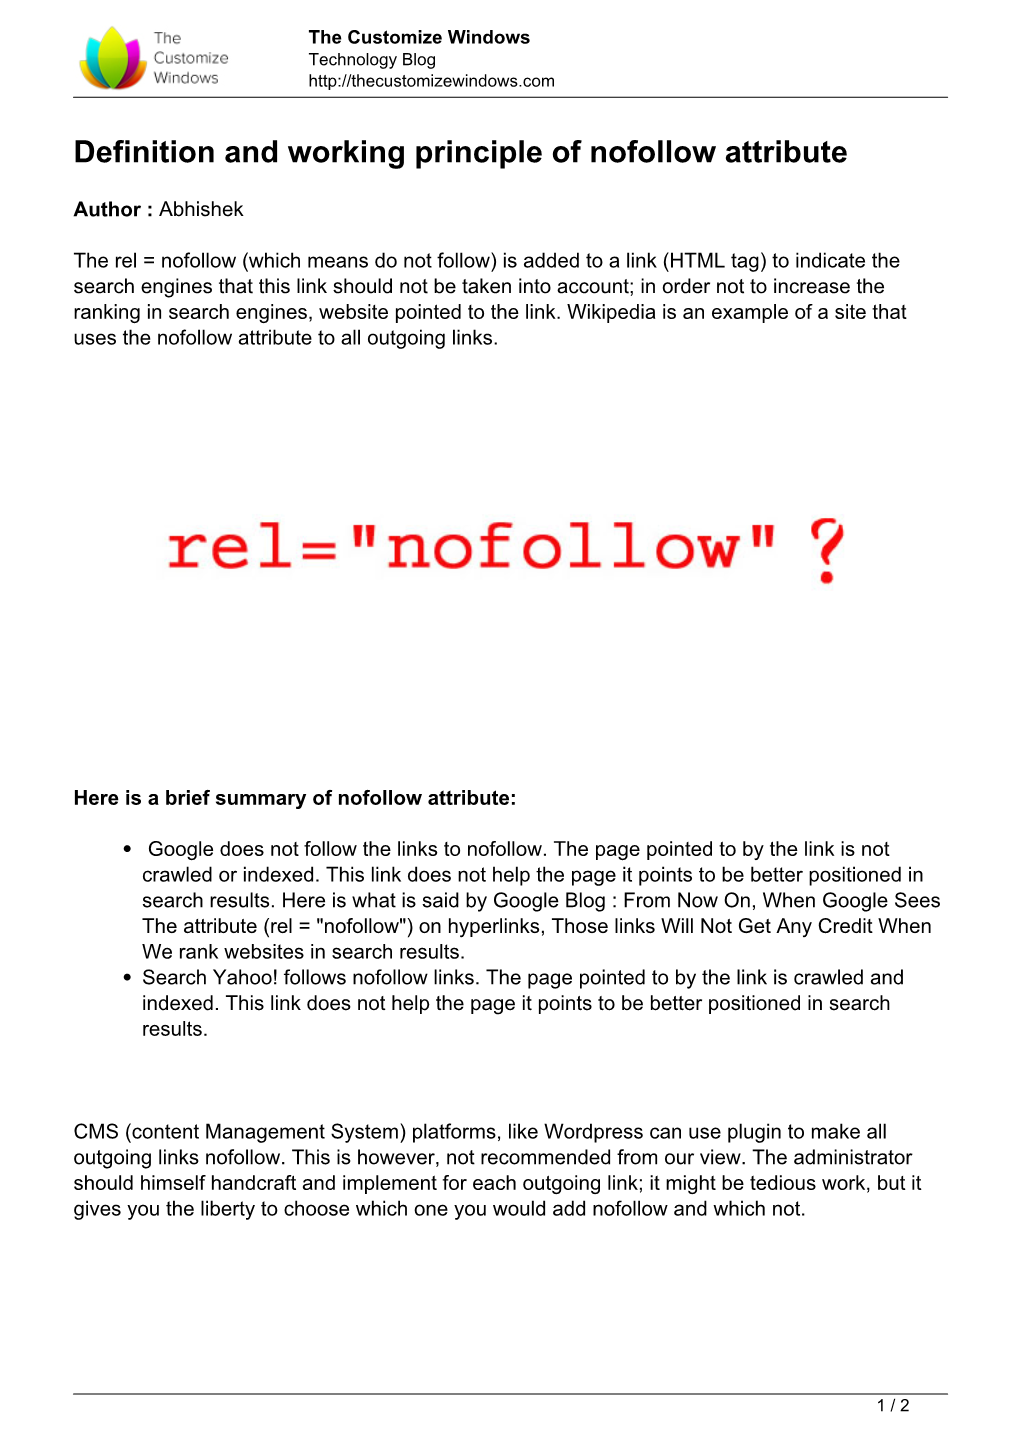 Definition and Working Principle of Nofollow Attribute